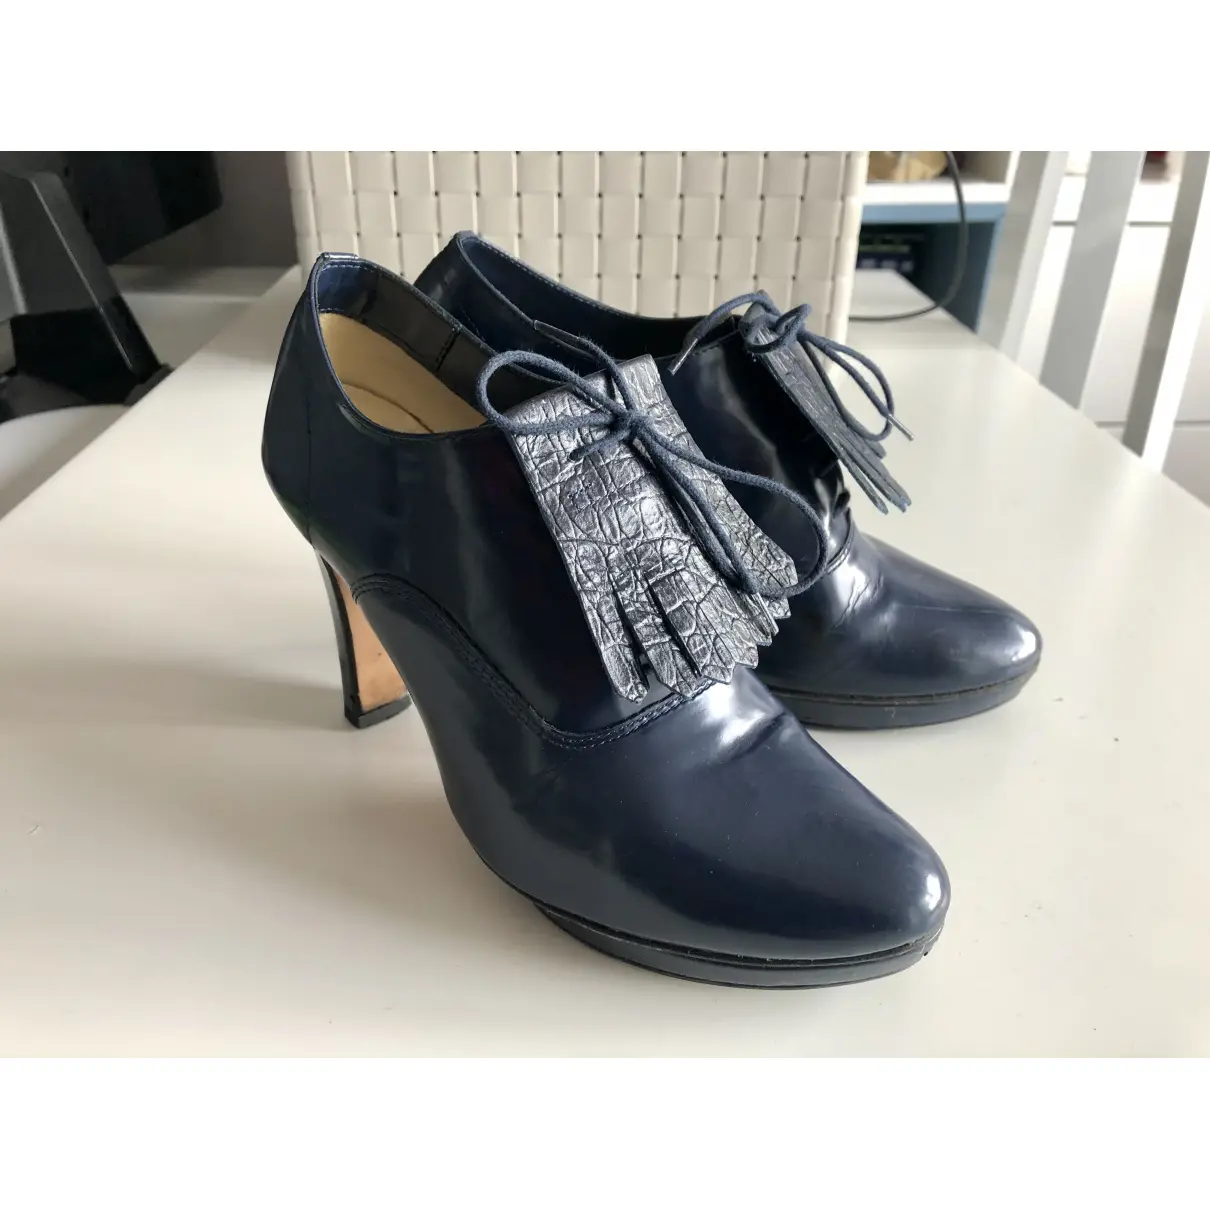 Buy Repetto Patent leather lace up boots online